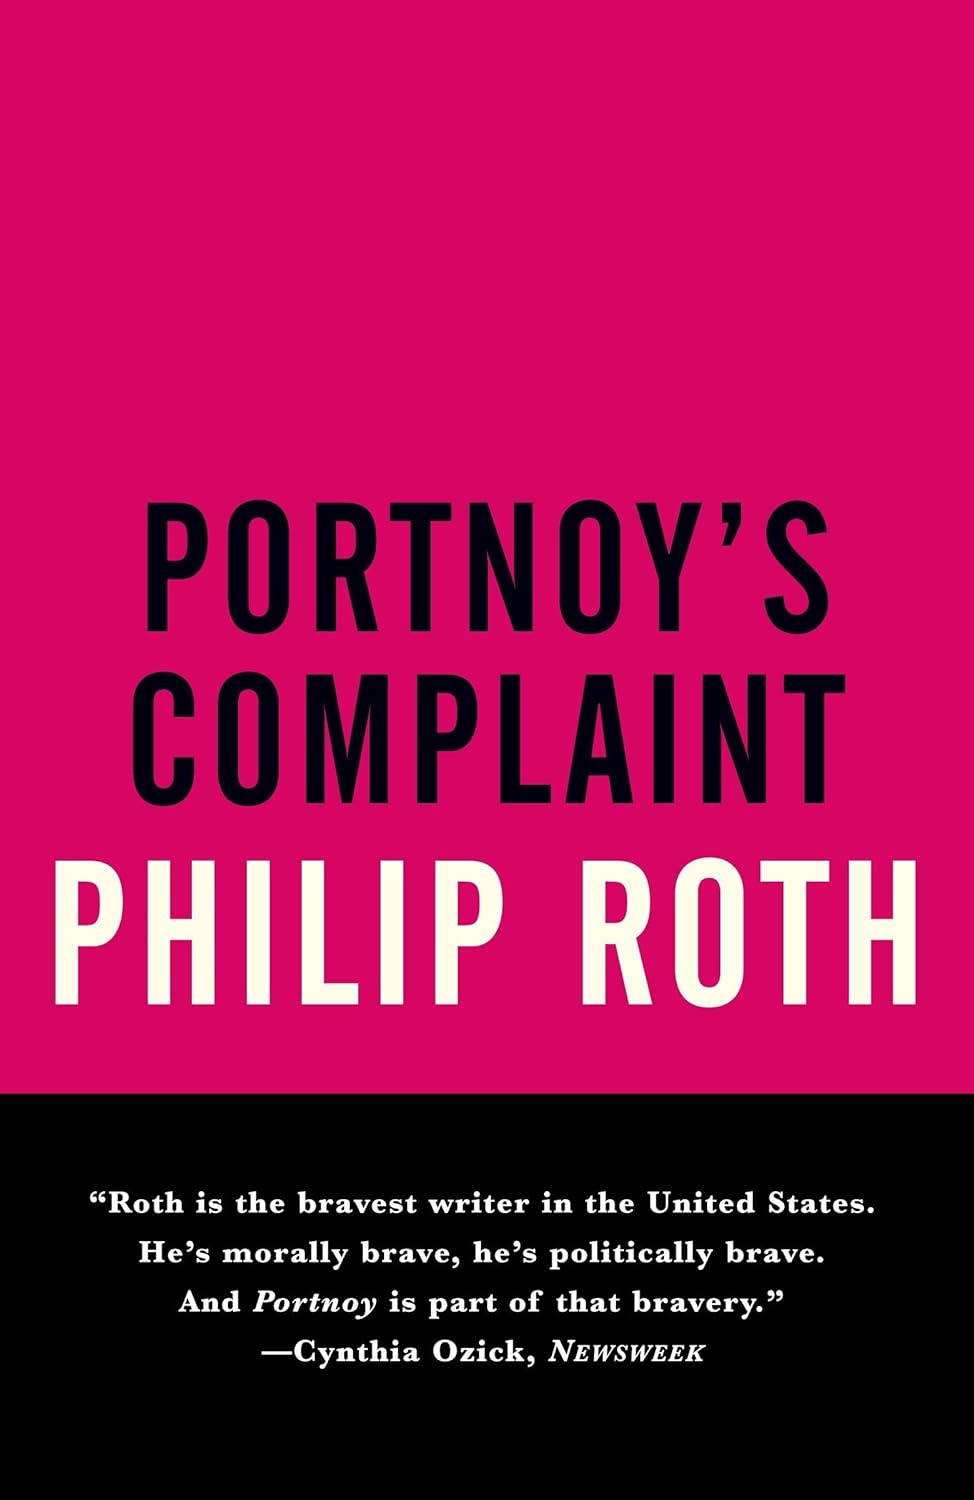 “Portnoy's Complaint” By Philip Roth (1969)